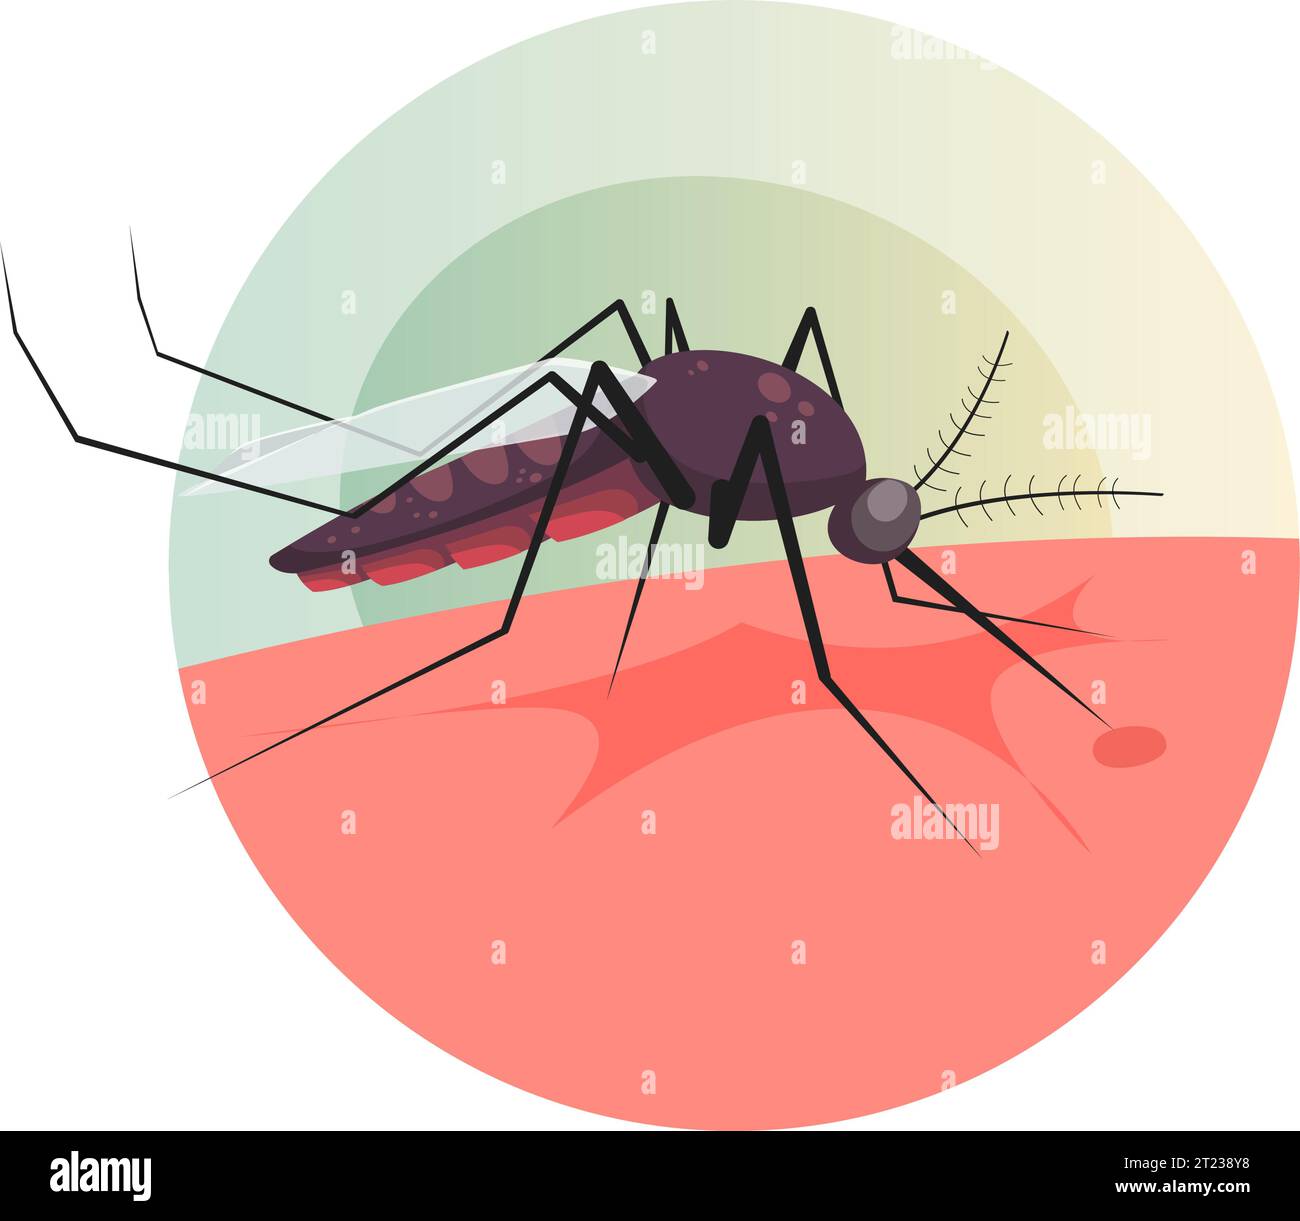 Mosquito Biting On Human Skin Stock Illustration As Eps 10 File Stock